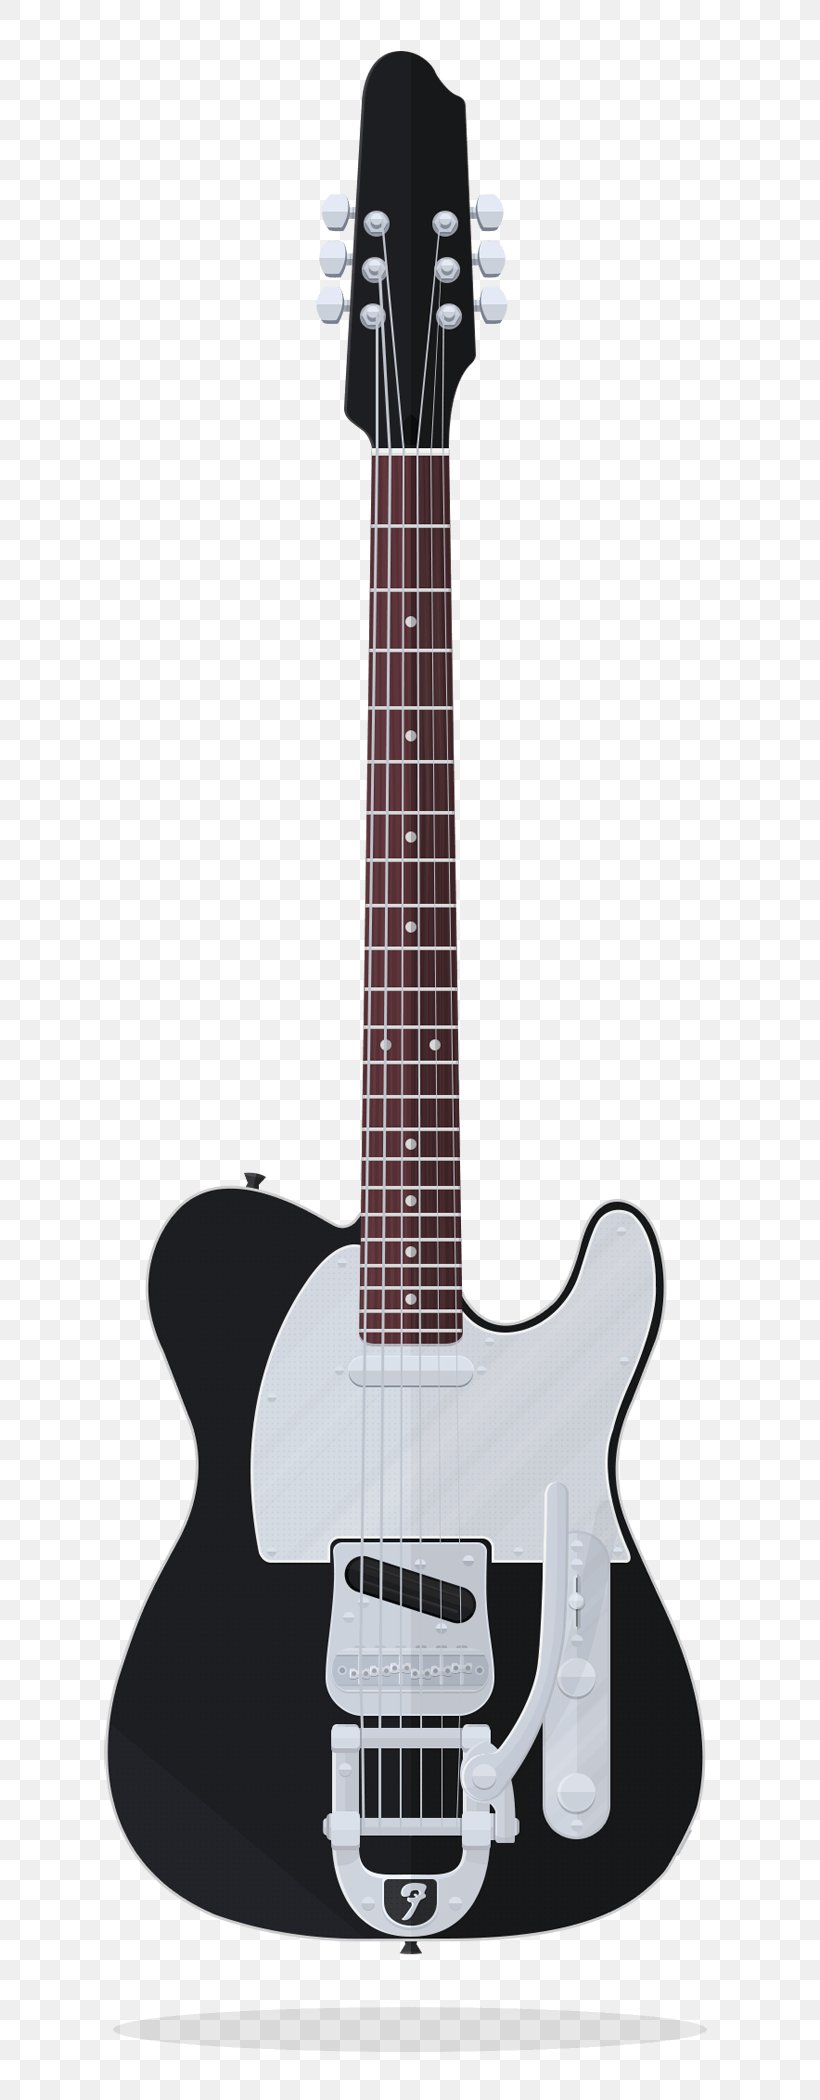 Fender Telecaster Fender J5 Telecaster Fender Stratocaster Guitar Musical Instruments, PNG, 800x2100px, Fender Telecaster, Acoustic Electric Guitar, Acoustic Guitar, Bass Guitar, Bigsby Vibrato Tailpiece Download Free